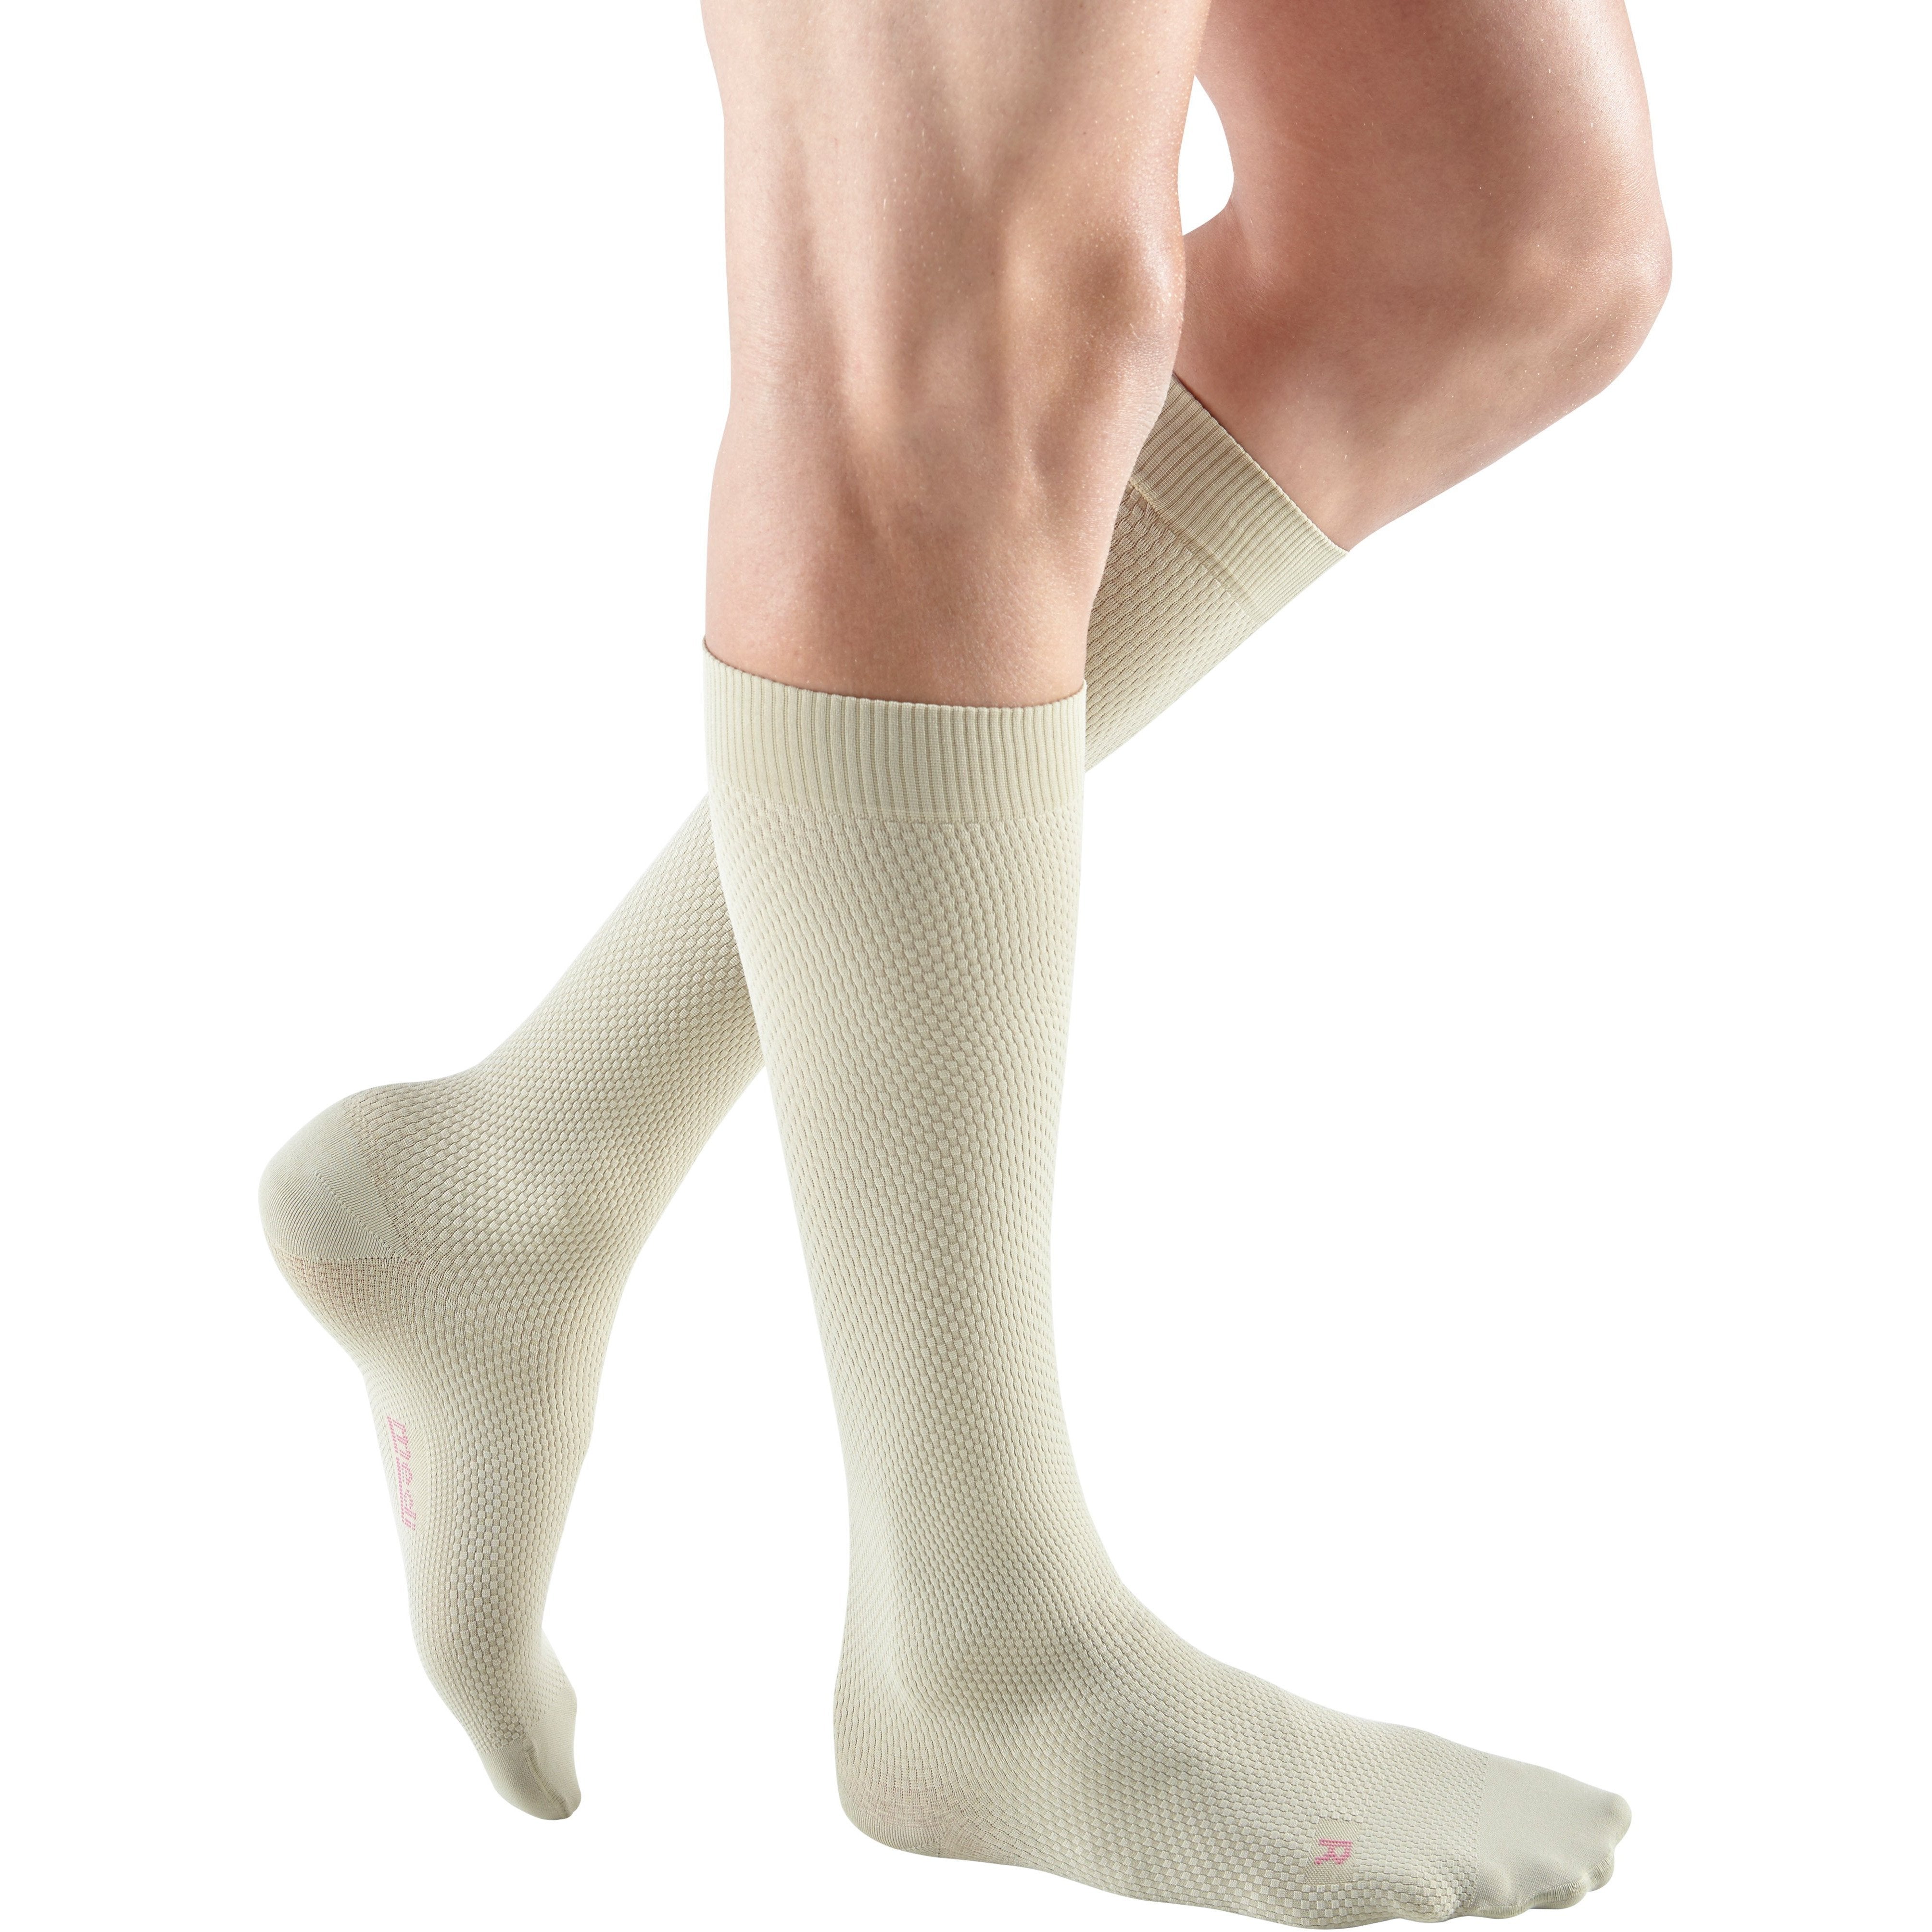 The technology behind mediven®: premium compression for life 